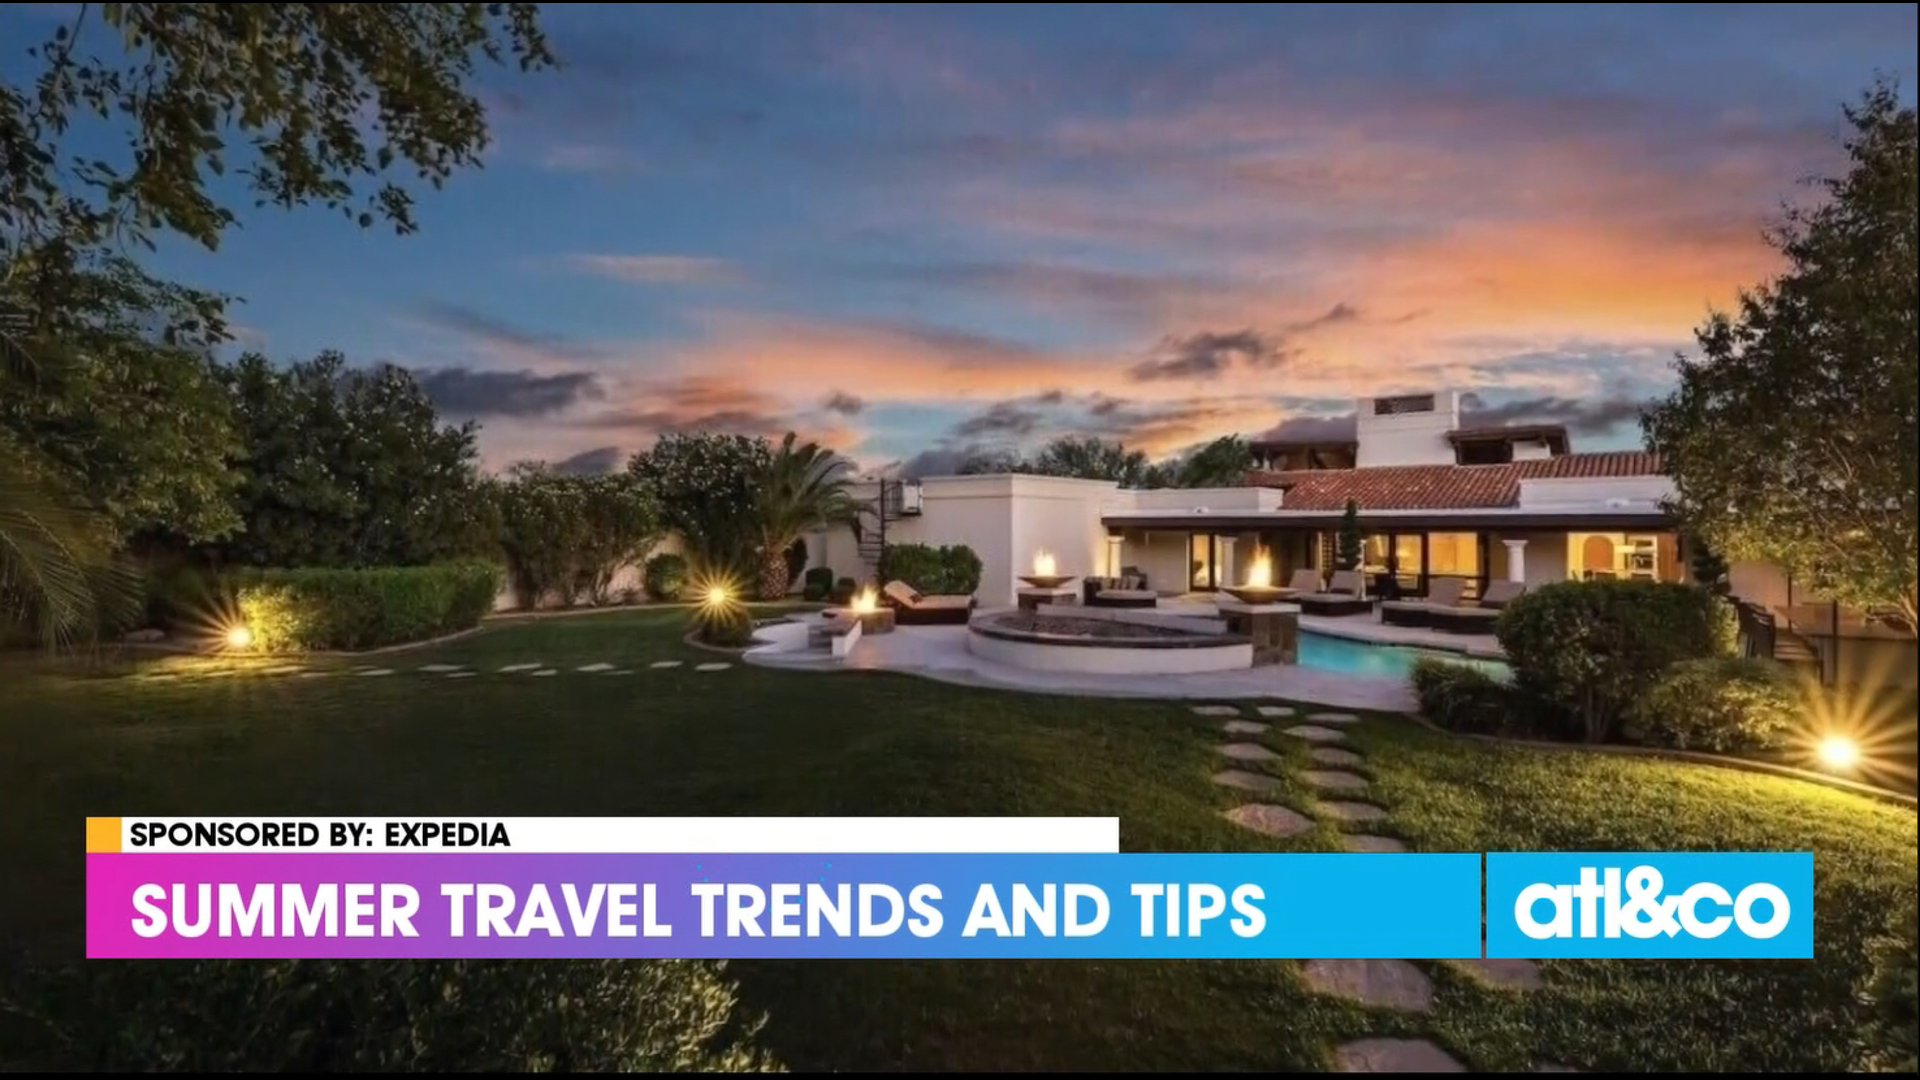 Travel contributor Melanie Fish shares summer booking tips with Expedia.